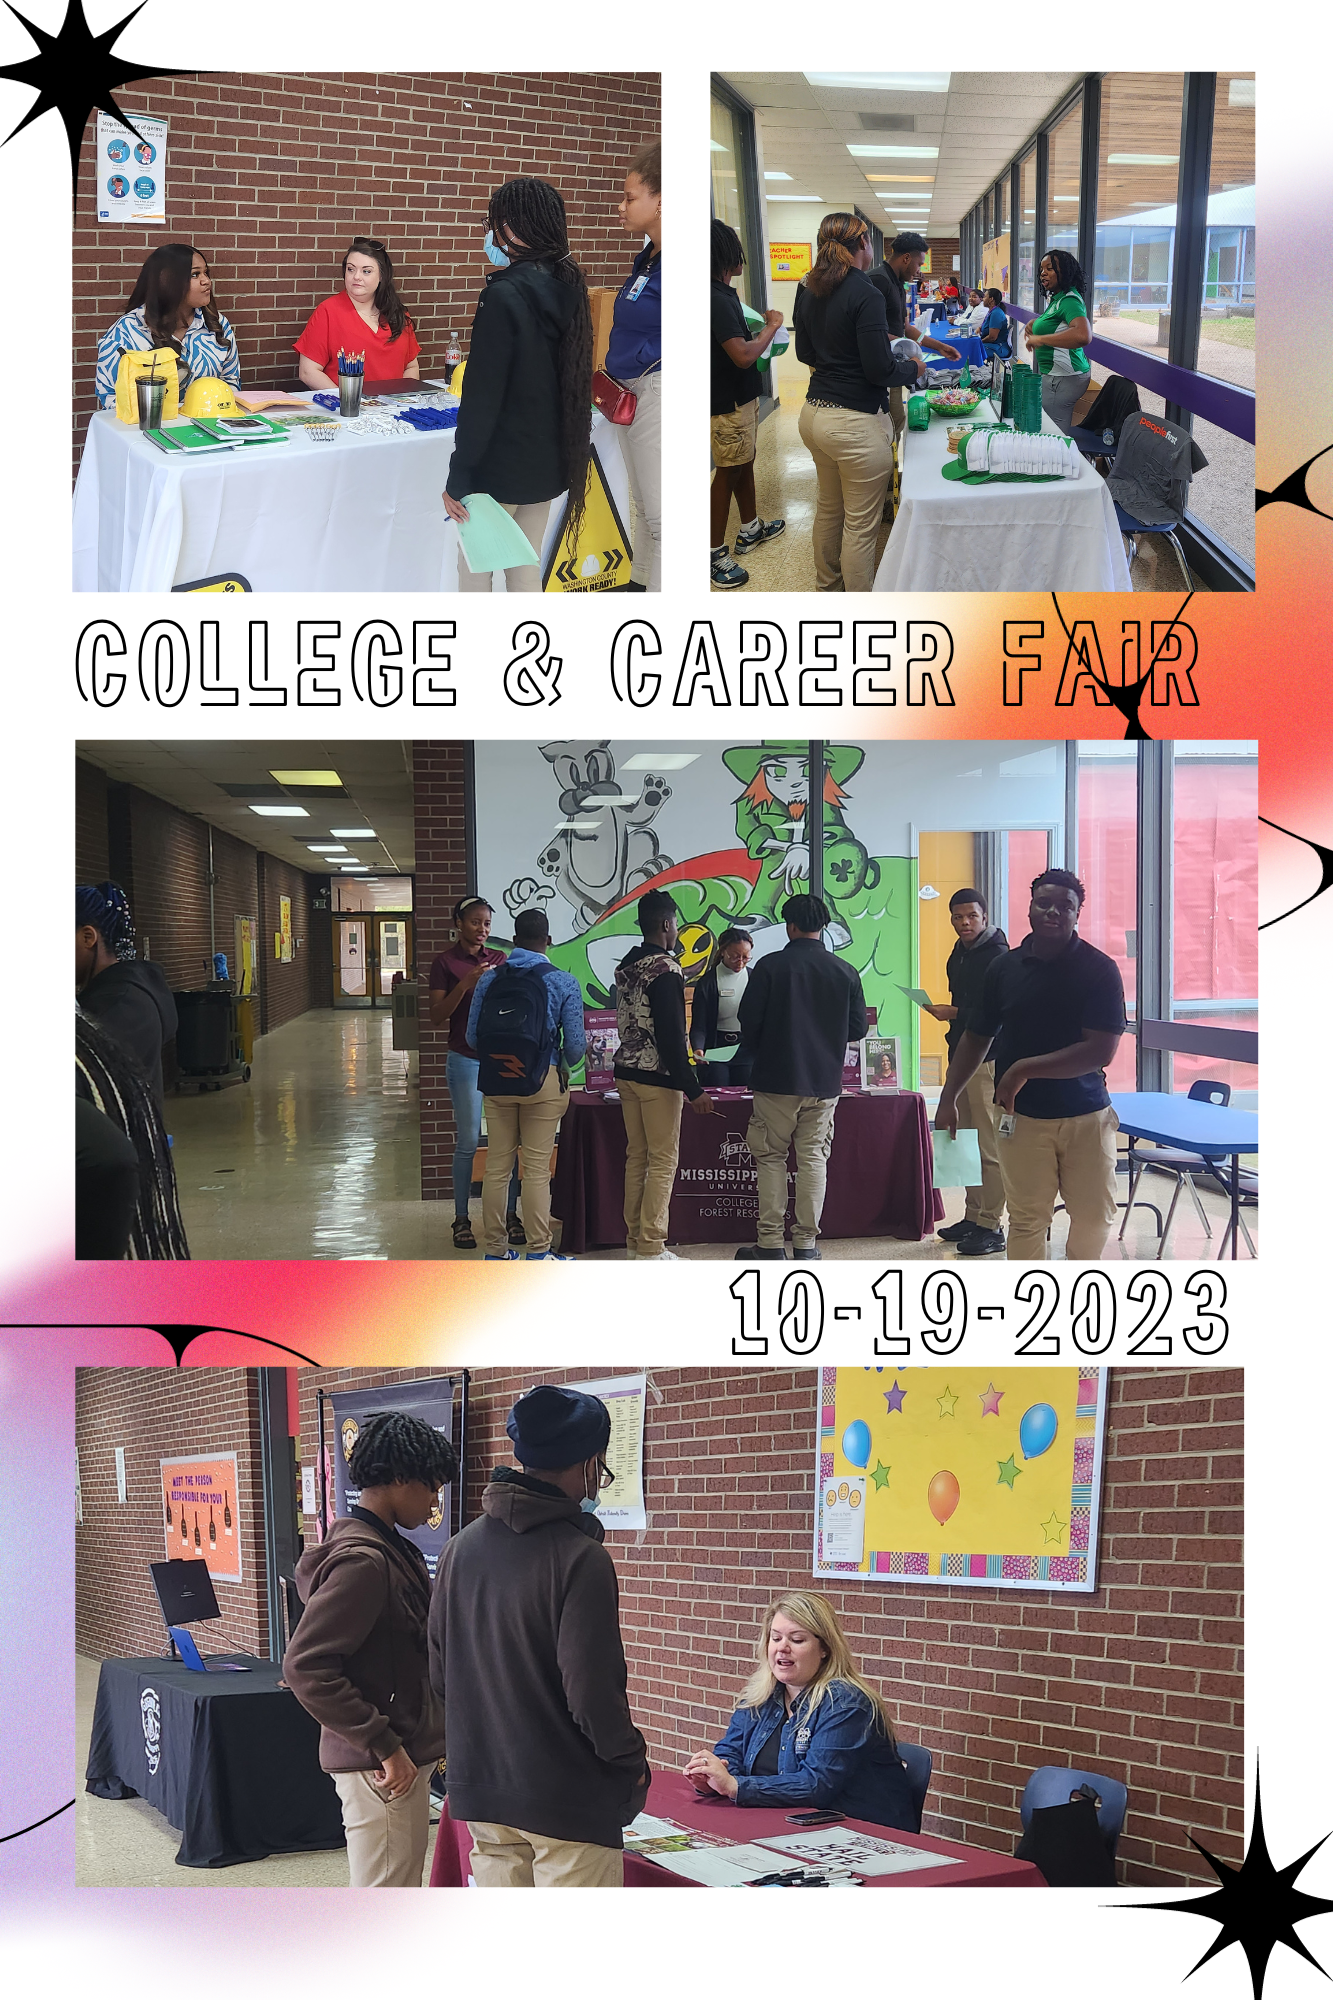 College and Career Fair 10-19-2023